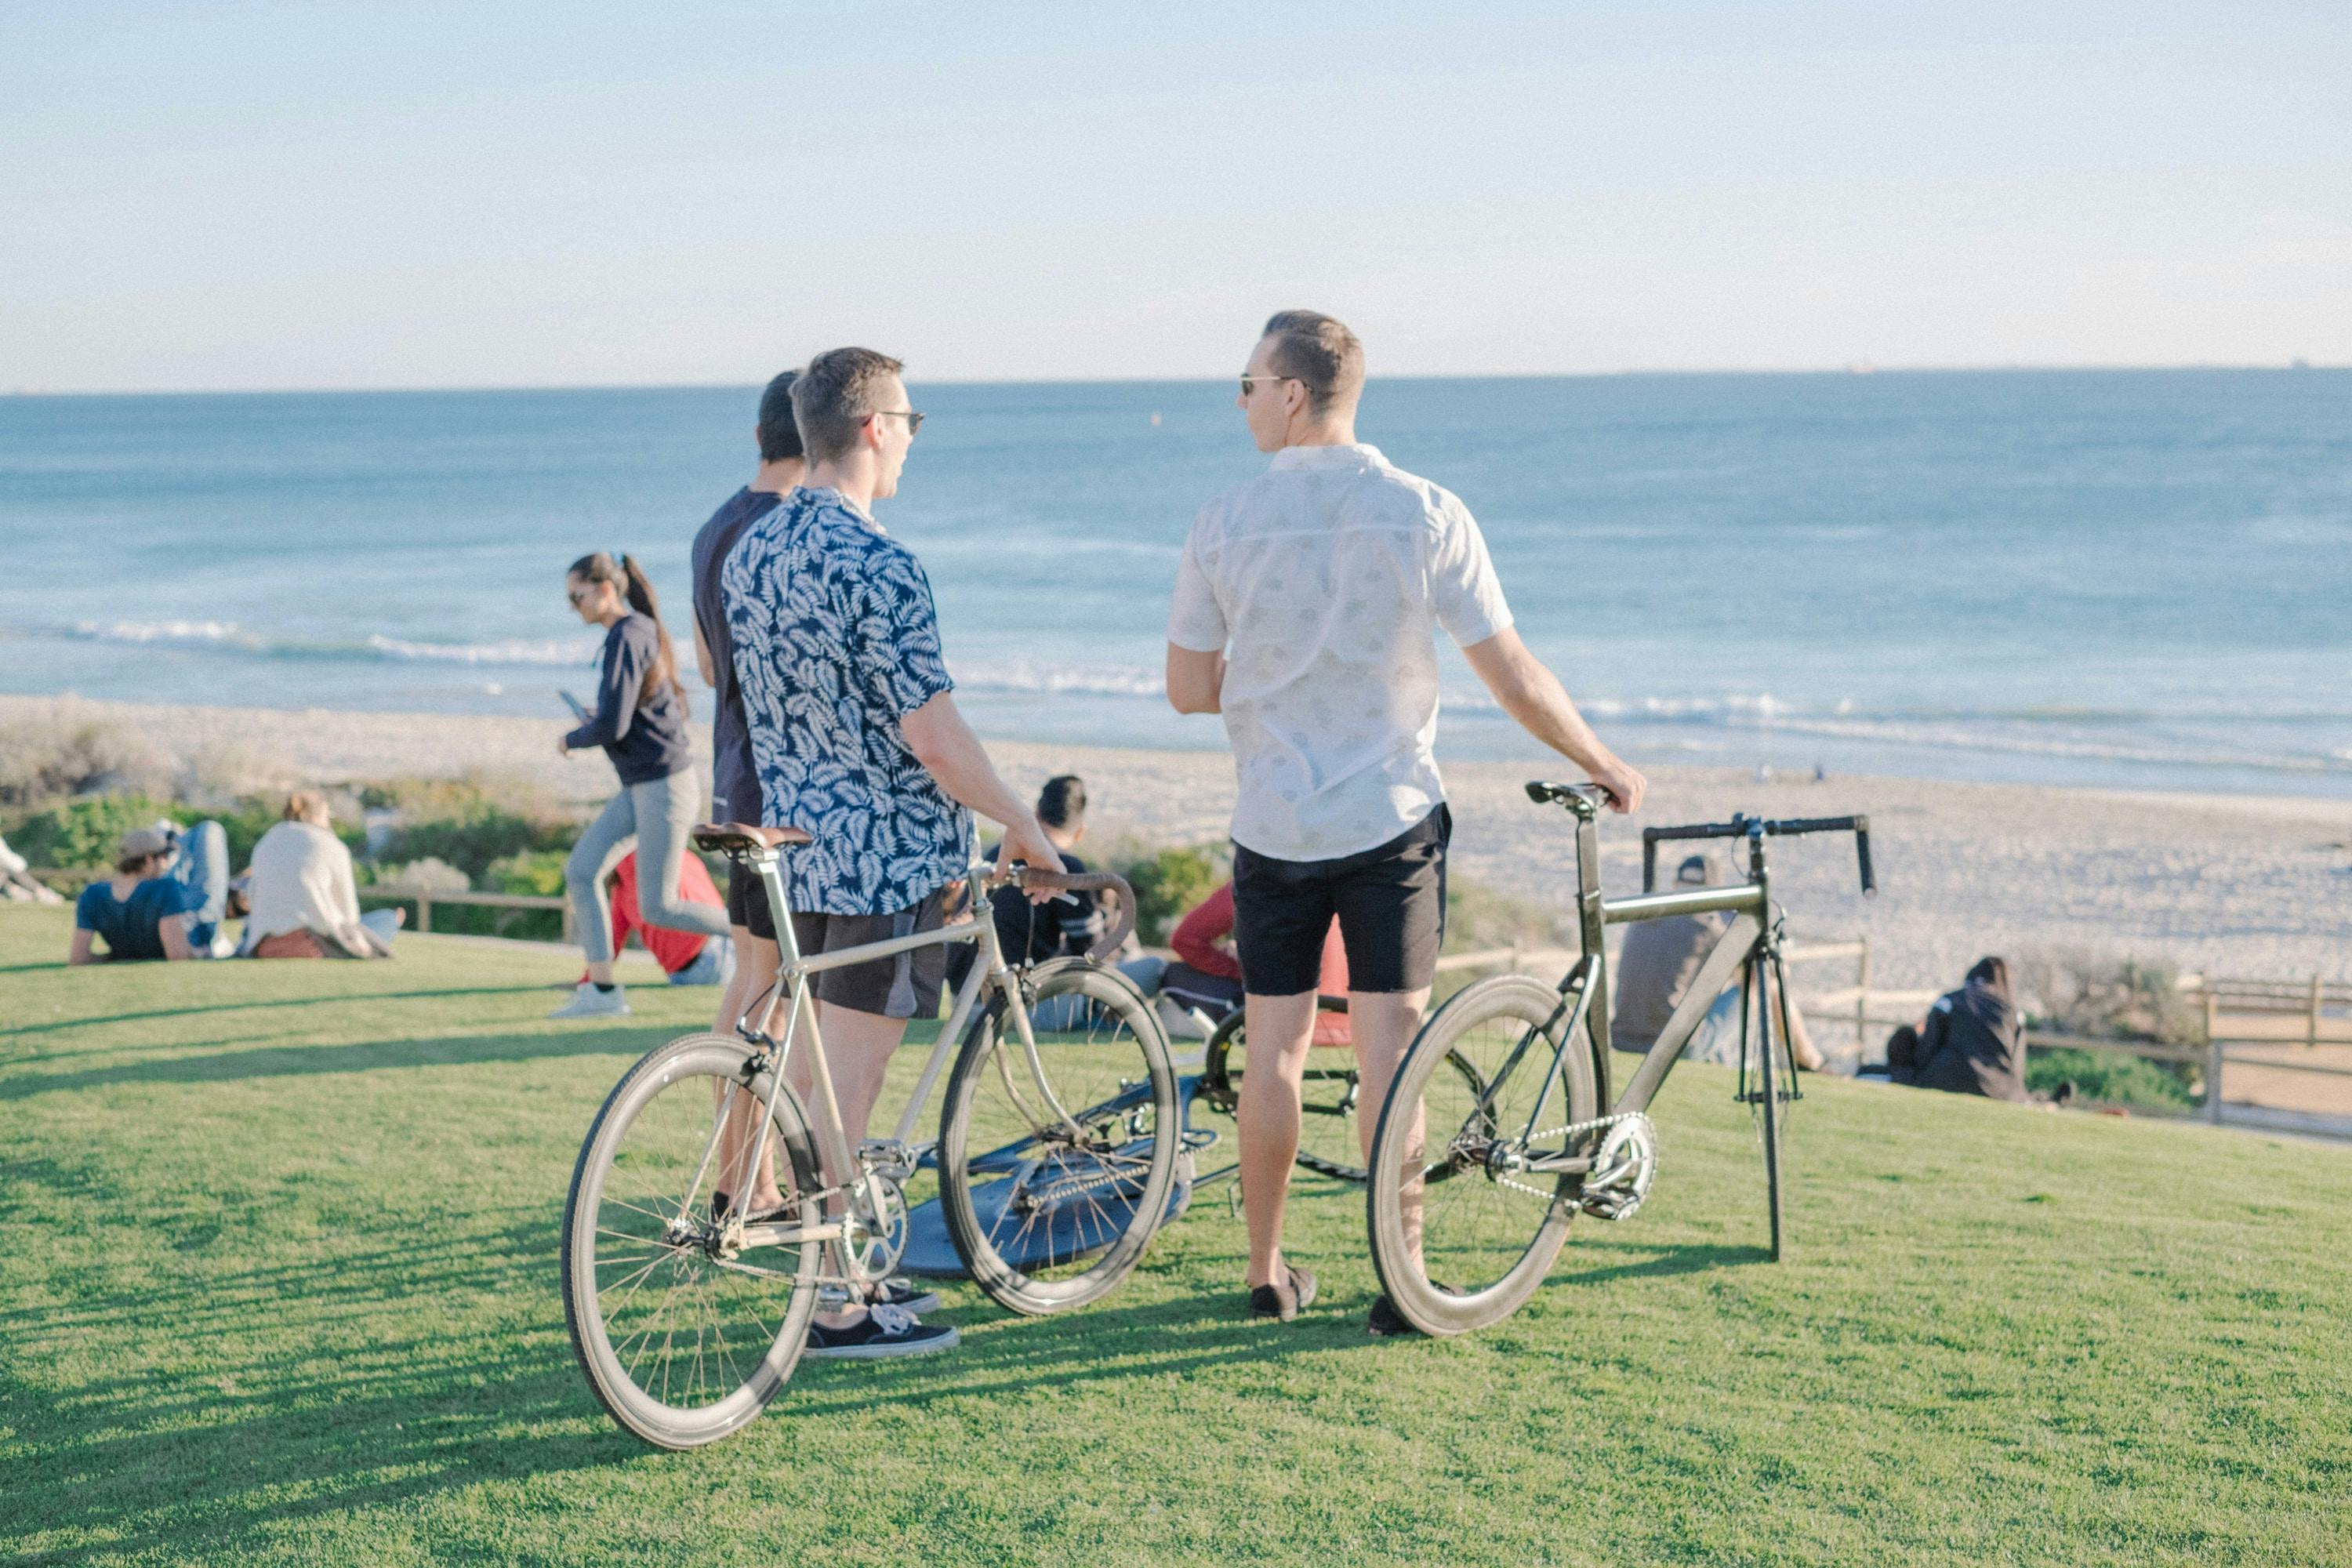 Cycling in Perth